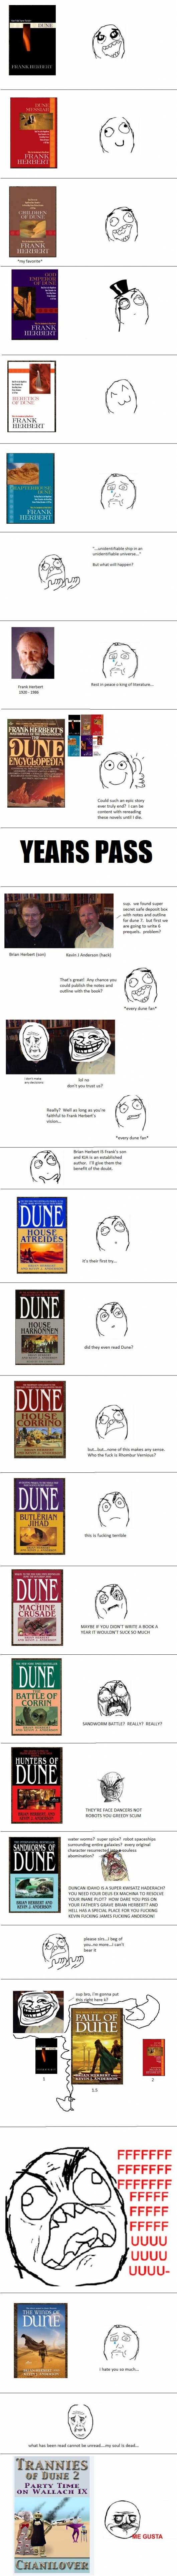 Reactions to the Dune books